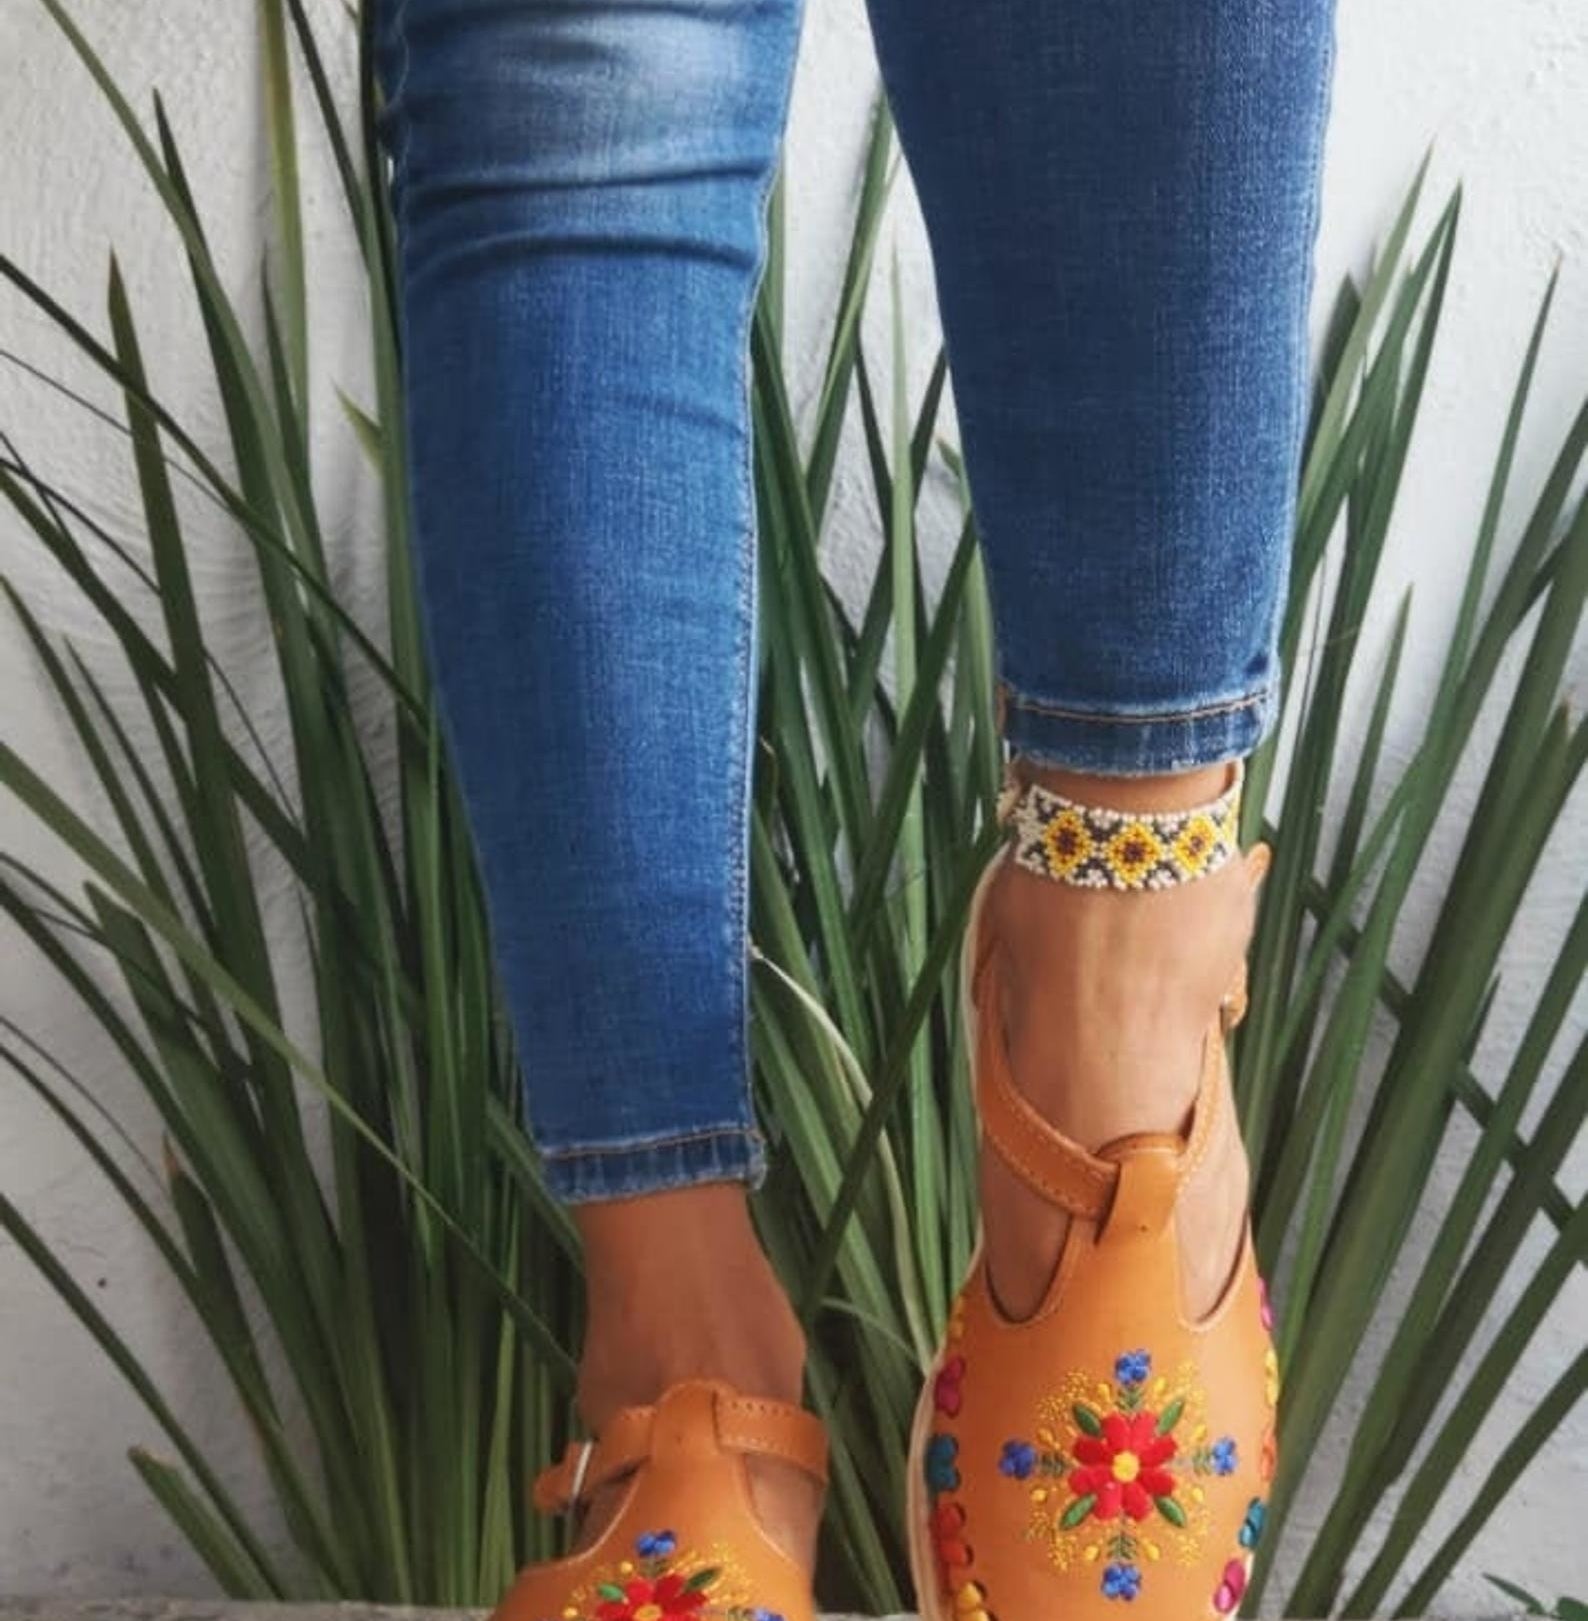 model wearing the tan shoes with shite sole and colorful flower on the top as well as colorful weaving between the sole and the top